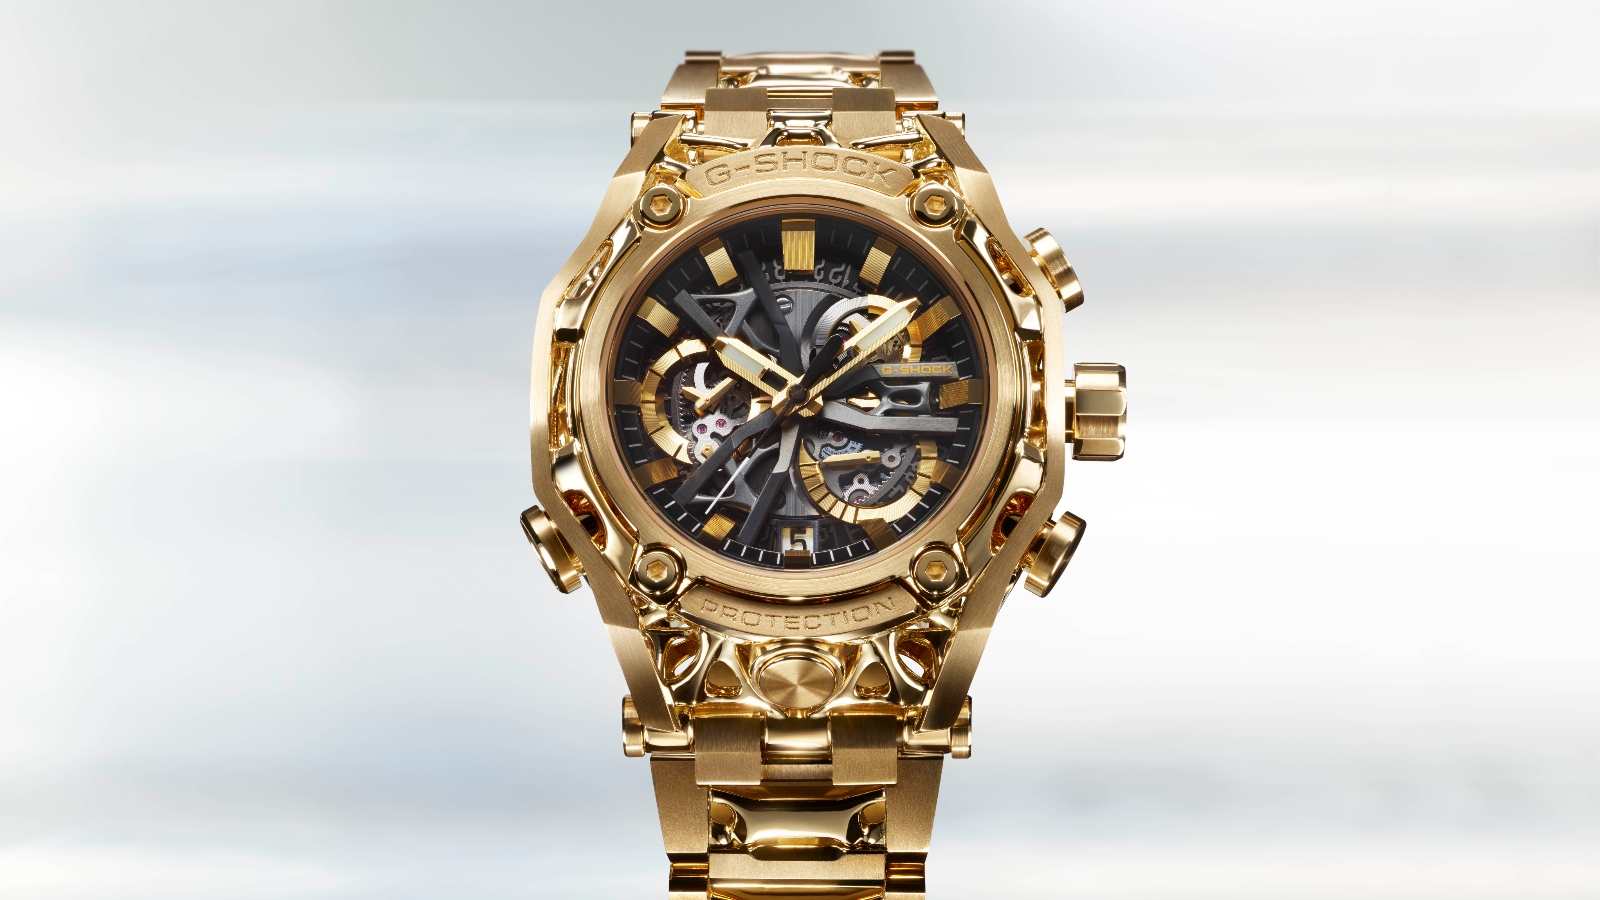 This One-of-one 18k Yellow Gold G-Shock Watch Will Be Auctioned For ...